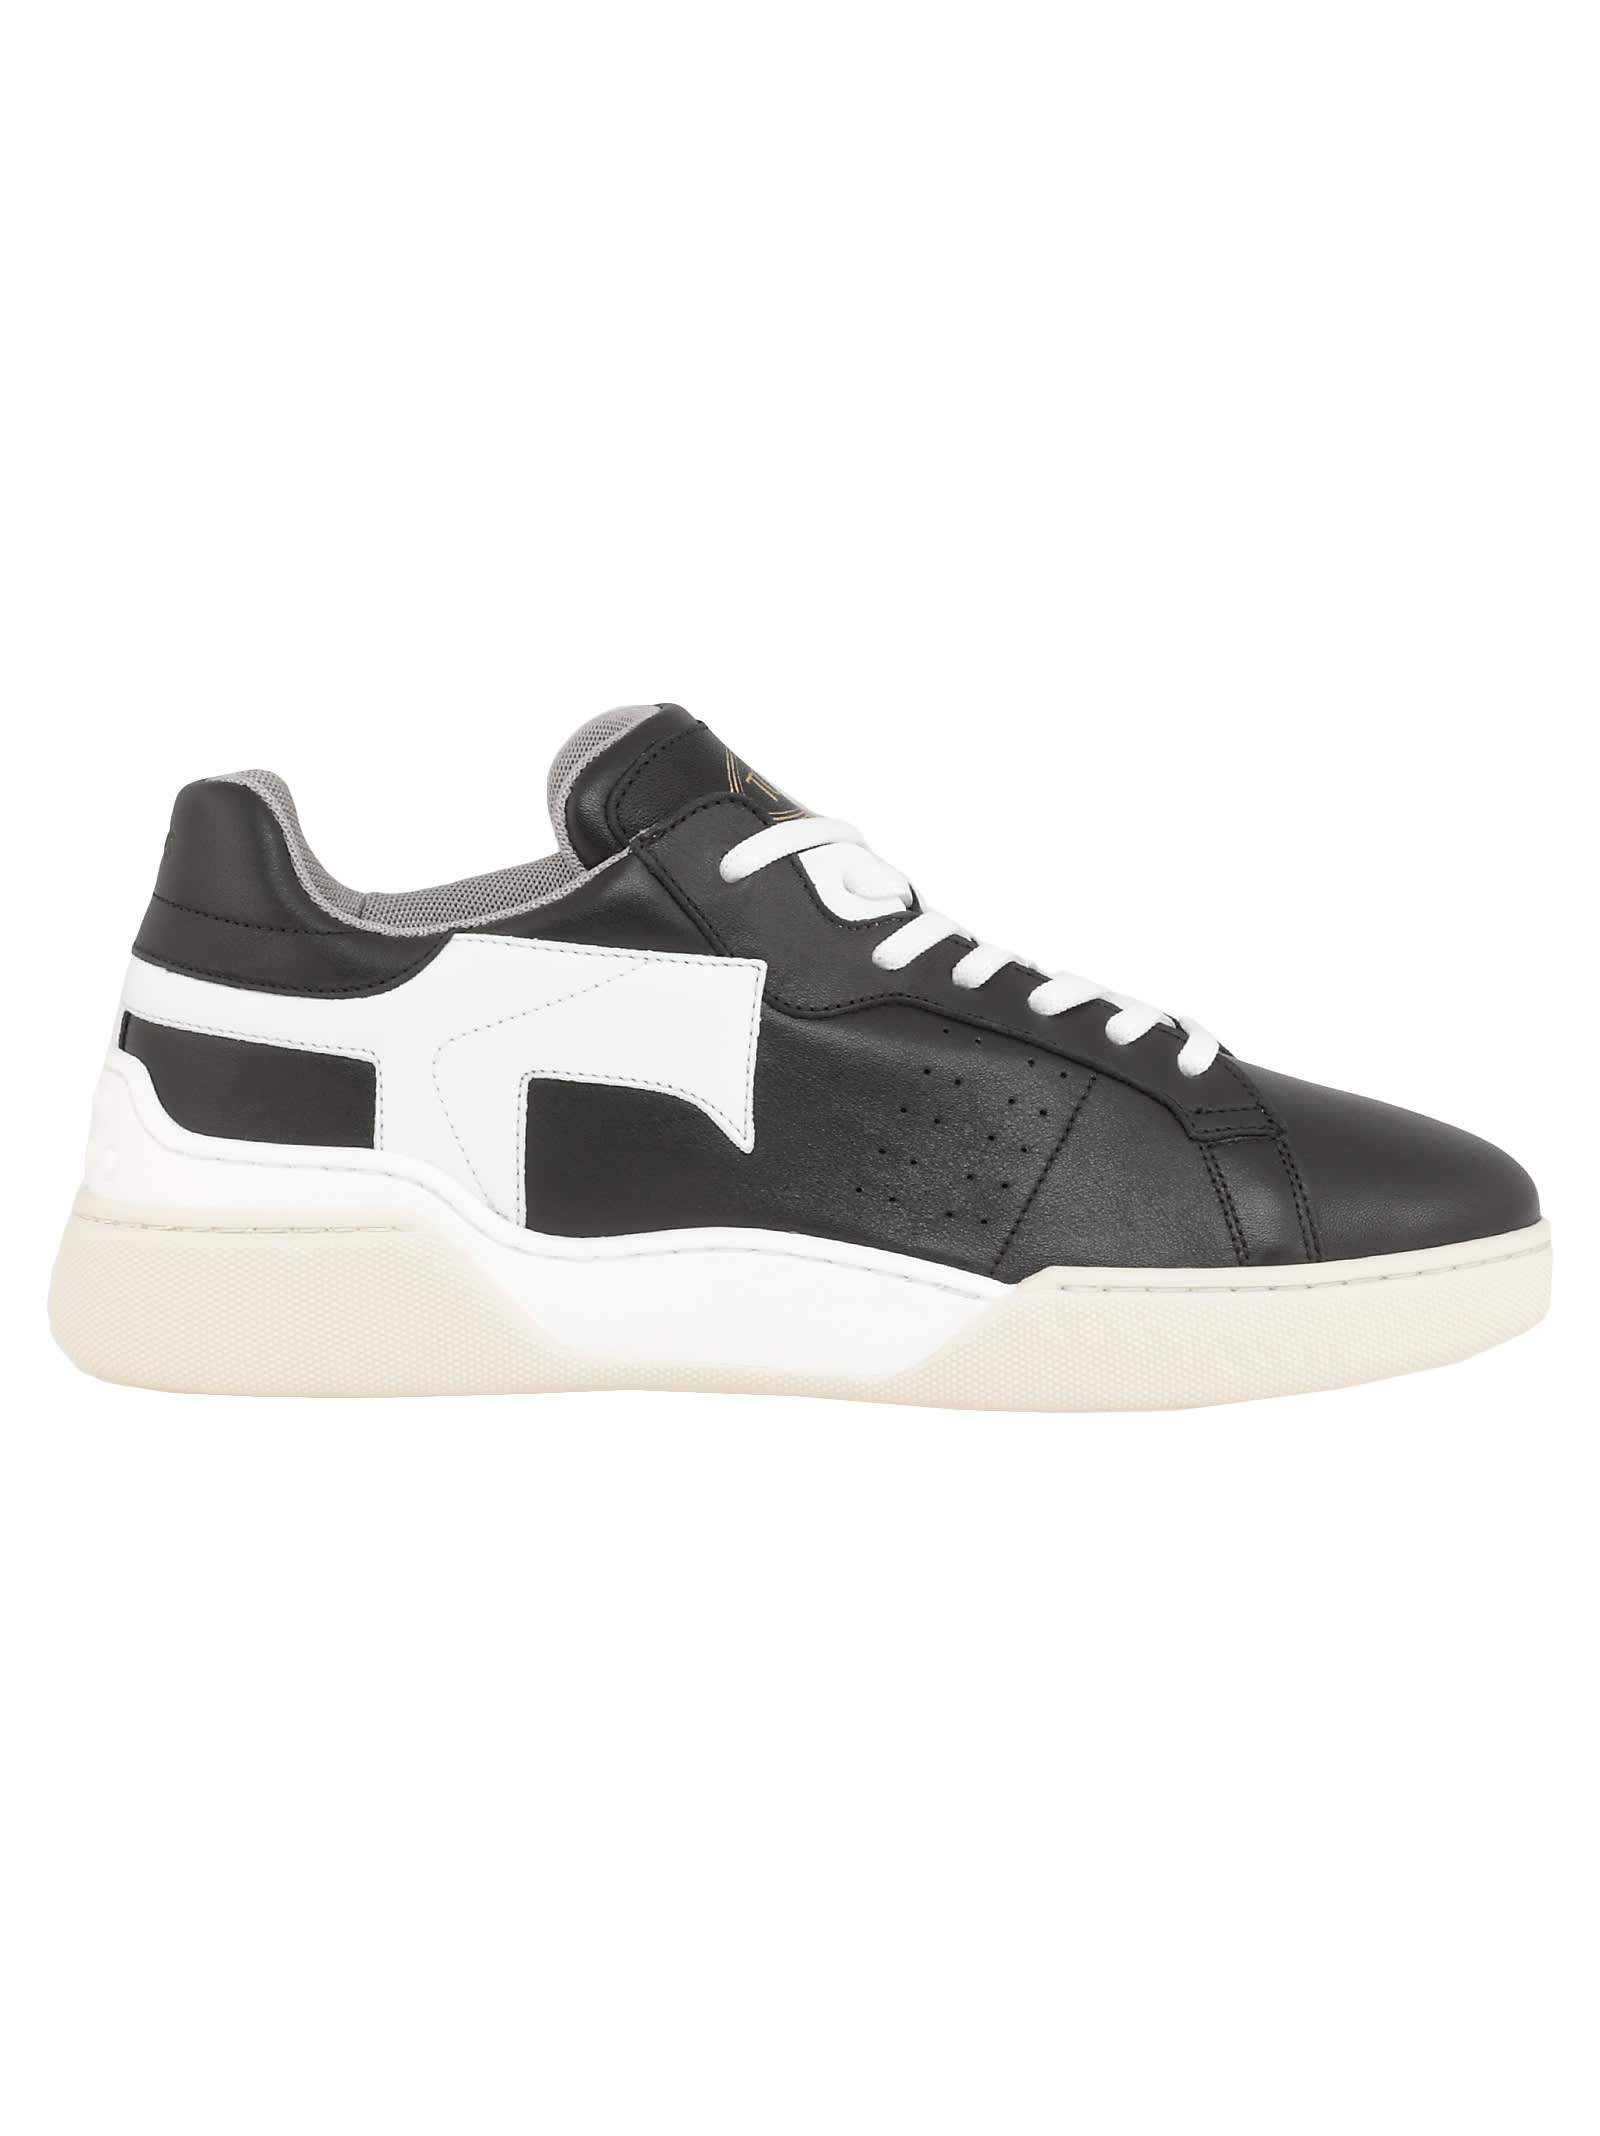 Buy Tods Leather Sneaker online, shop Tods shoes with free shipping